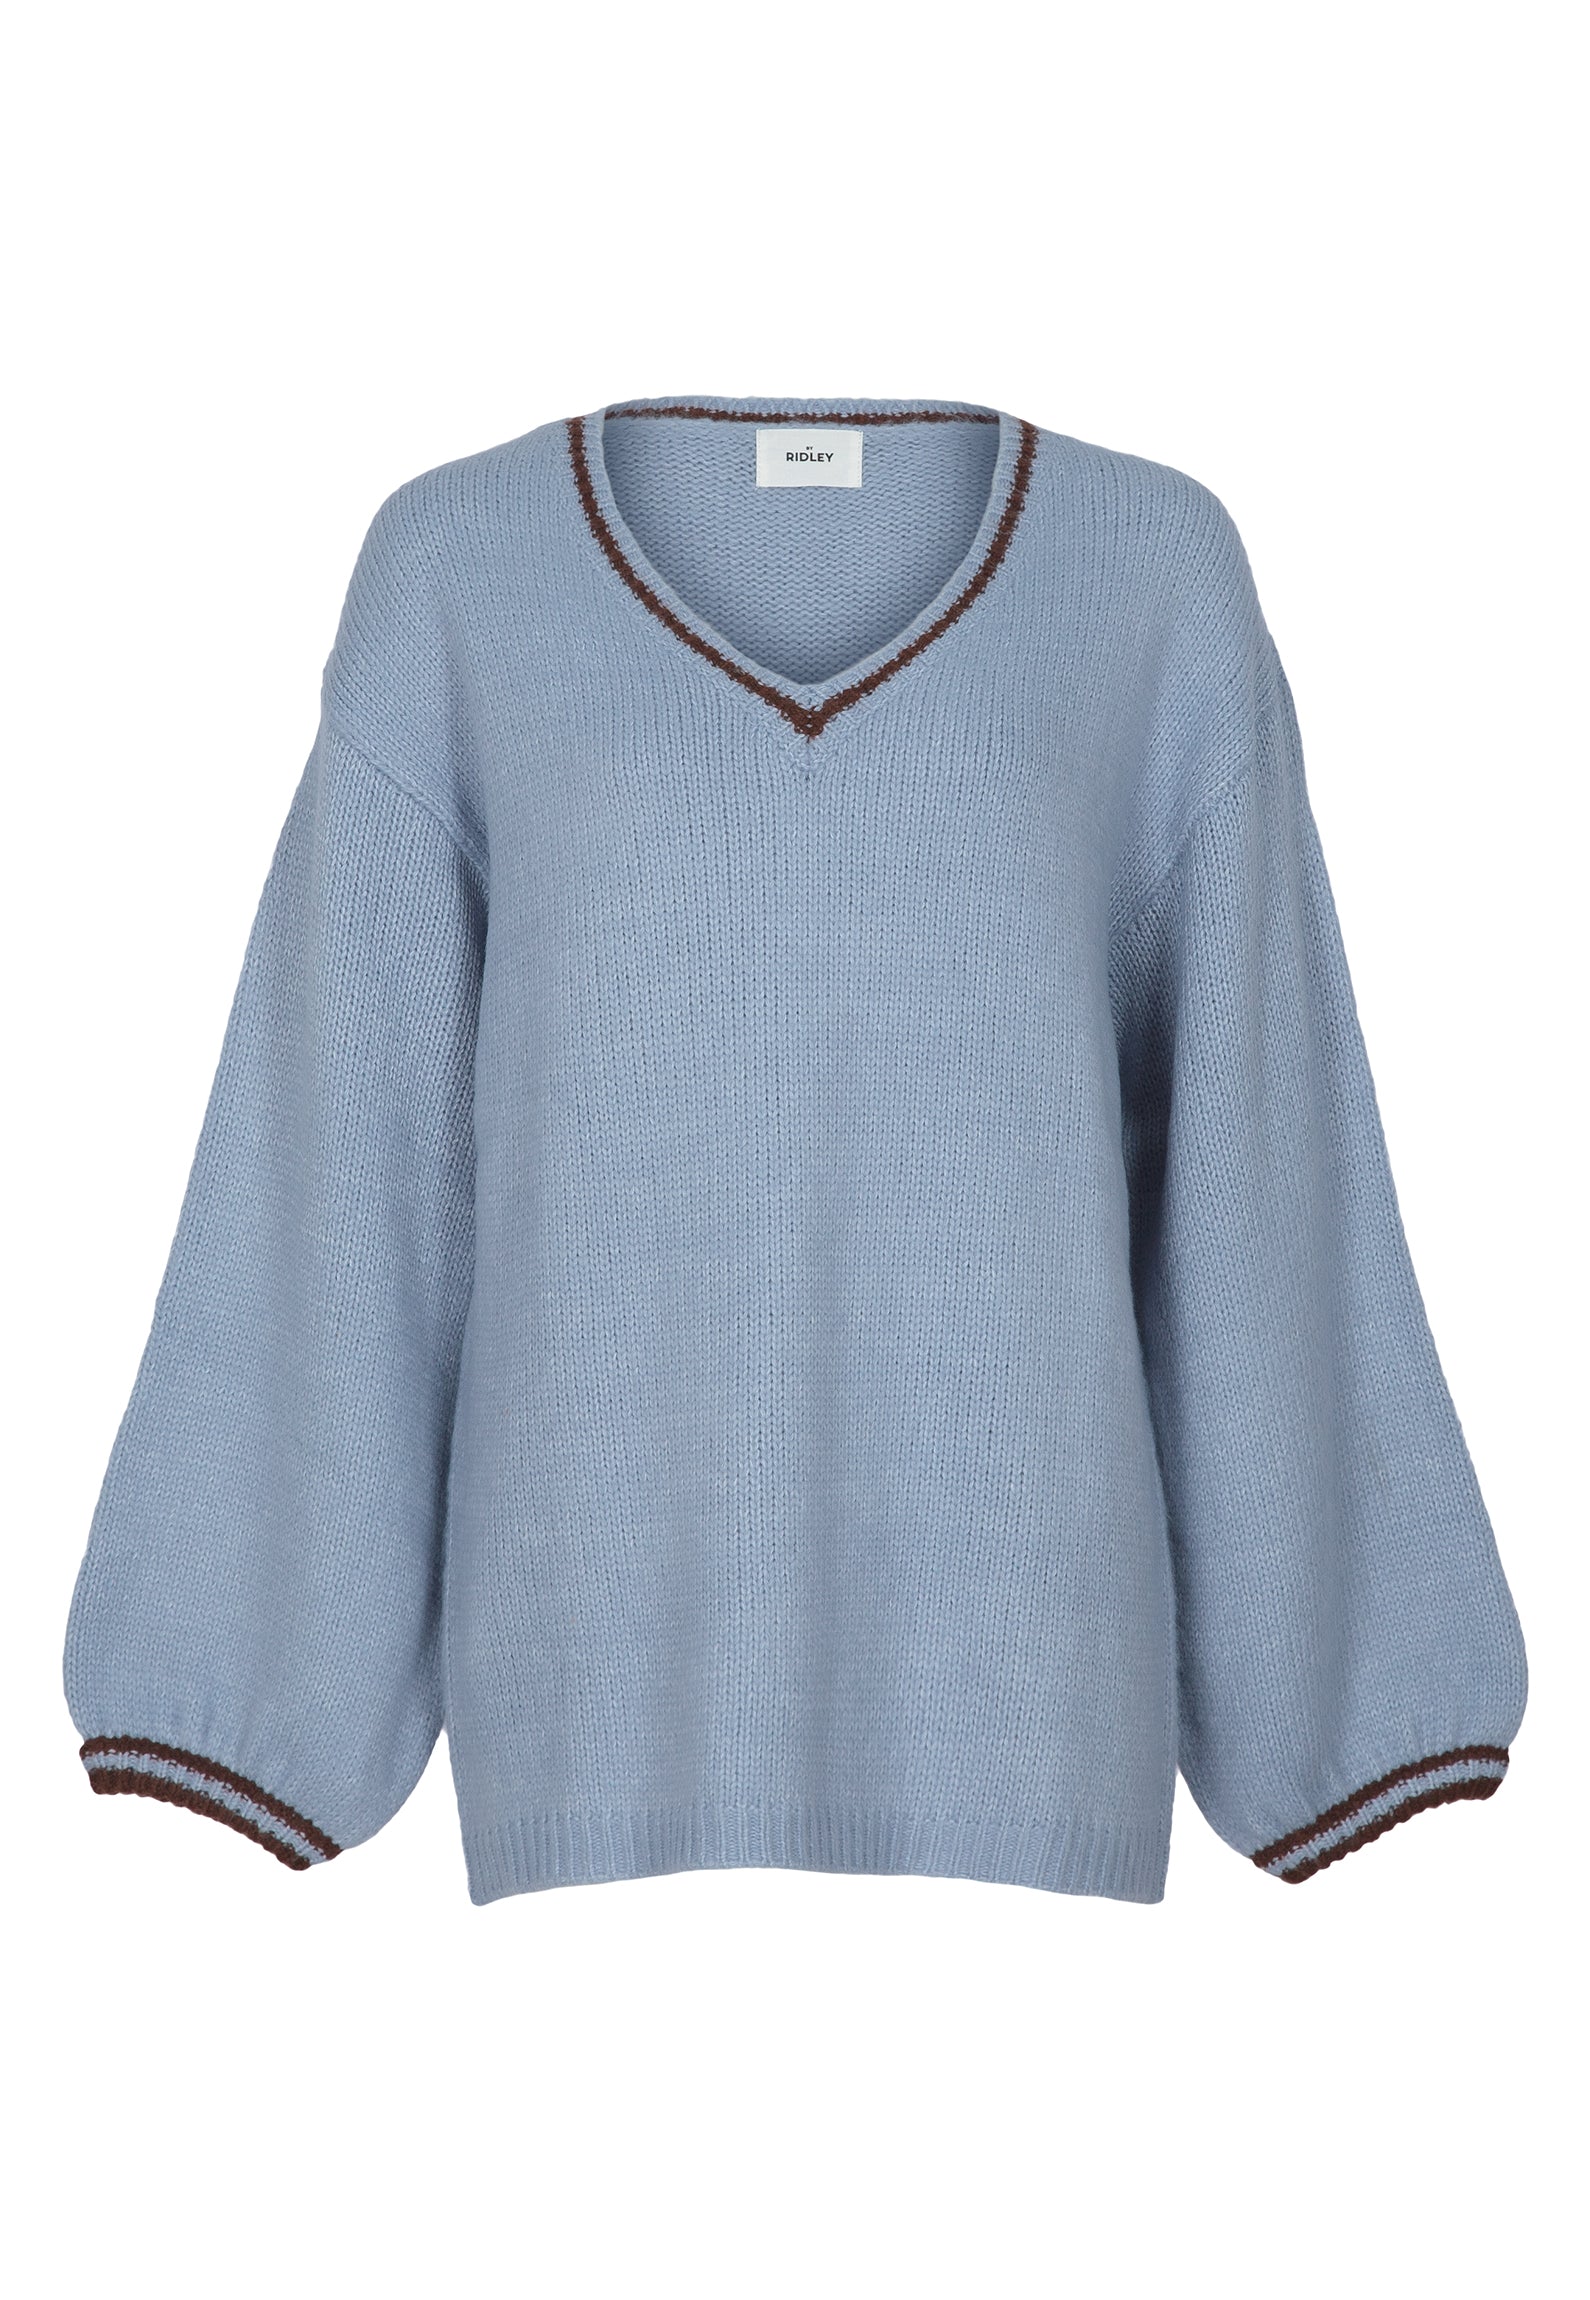 Layla Sweater - Sky Blue-Knitwear & Jumpers-By RIDLEY-The Bay Room